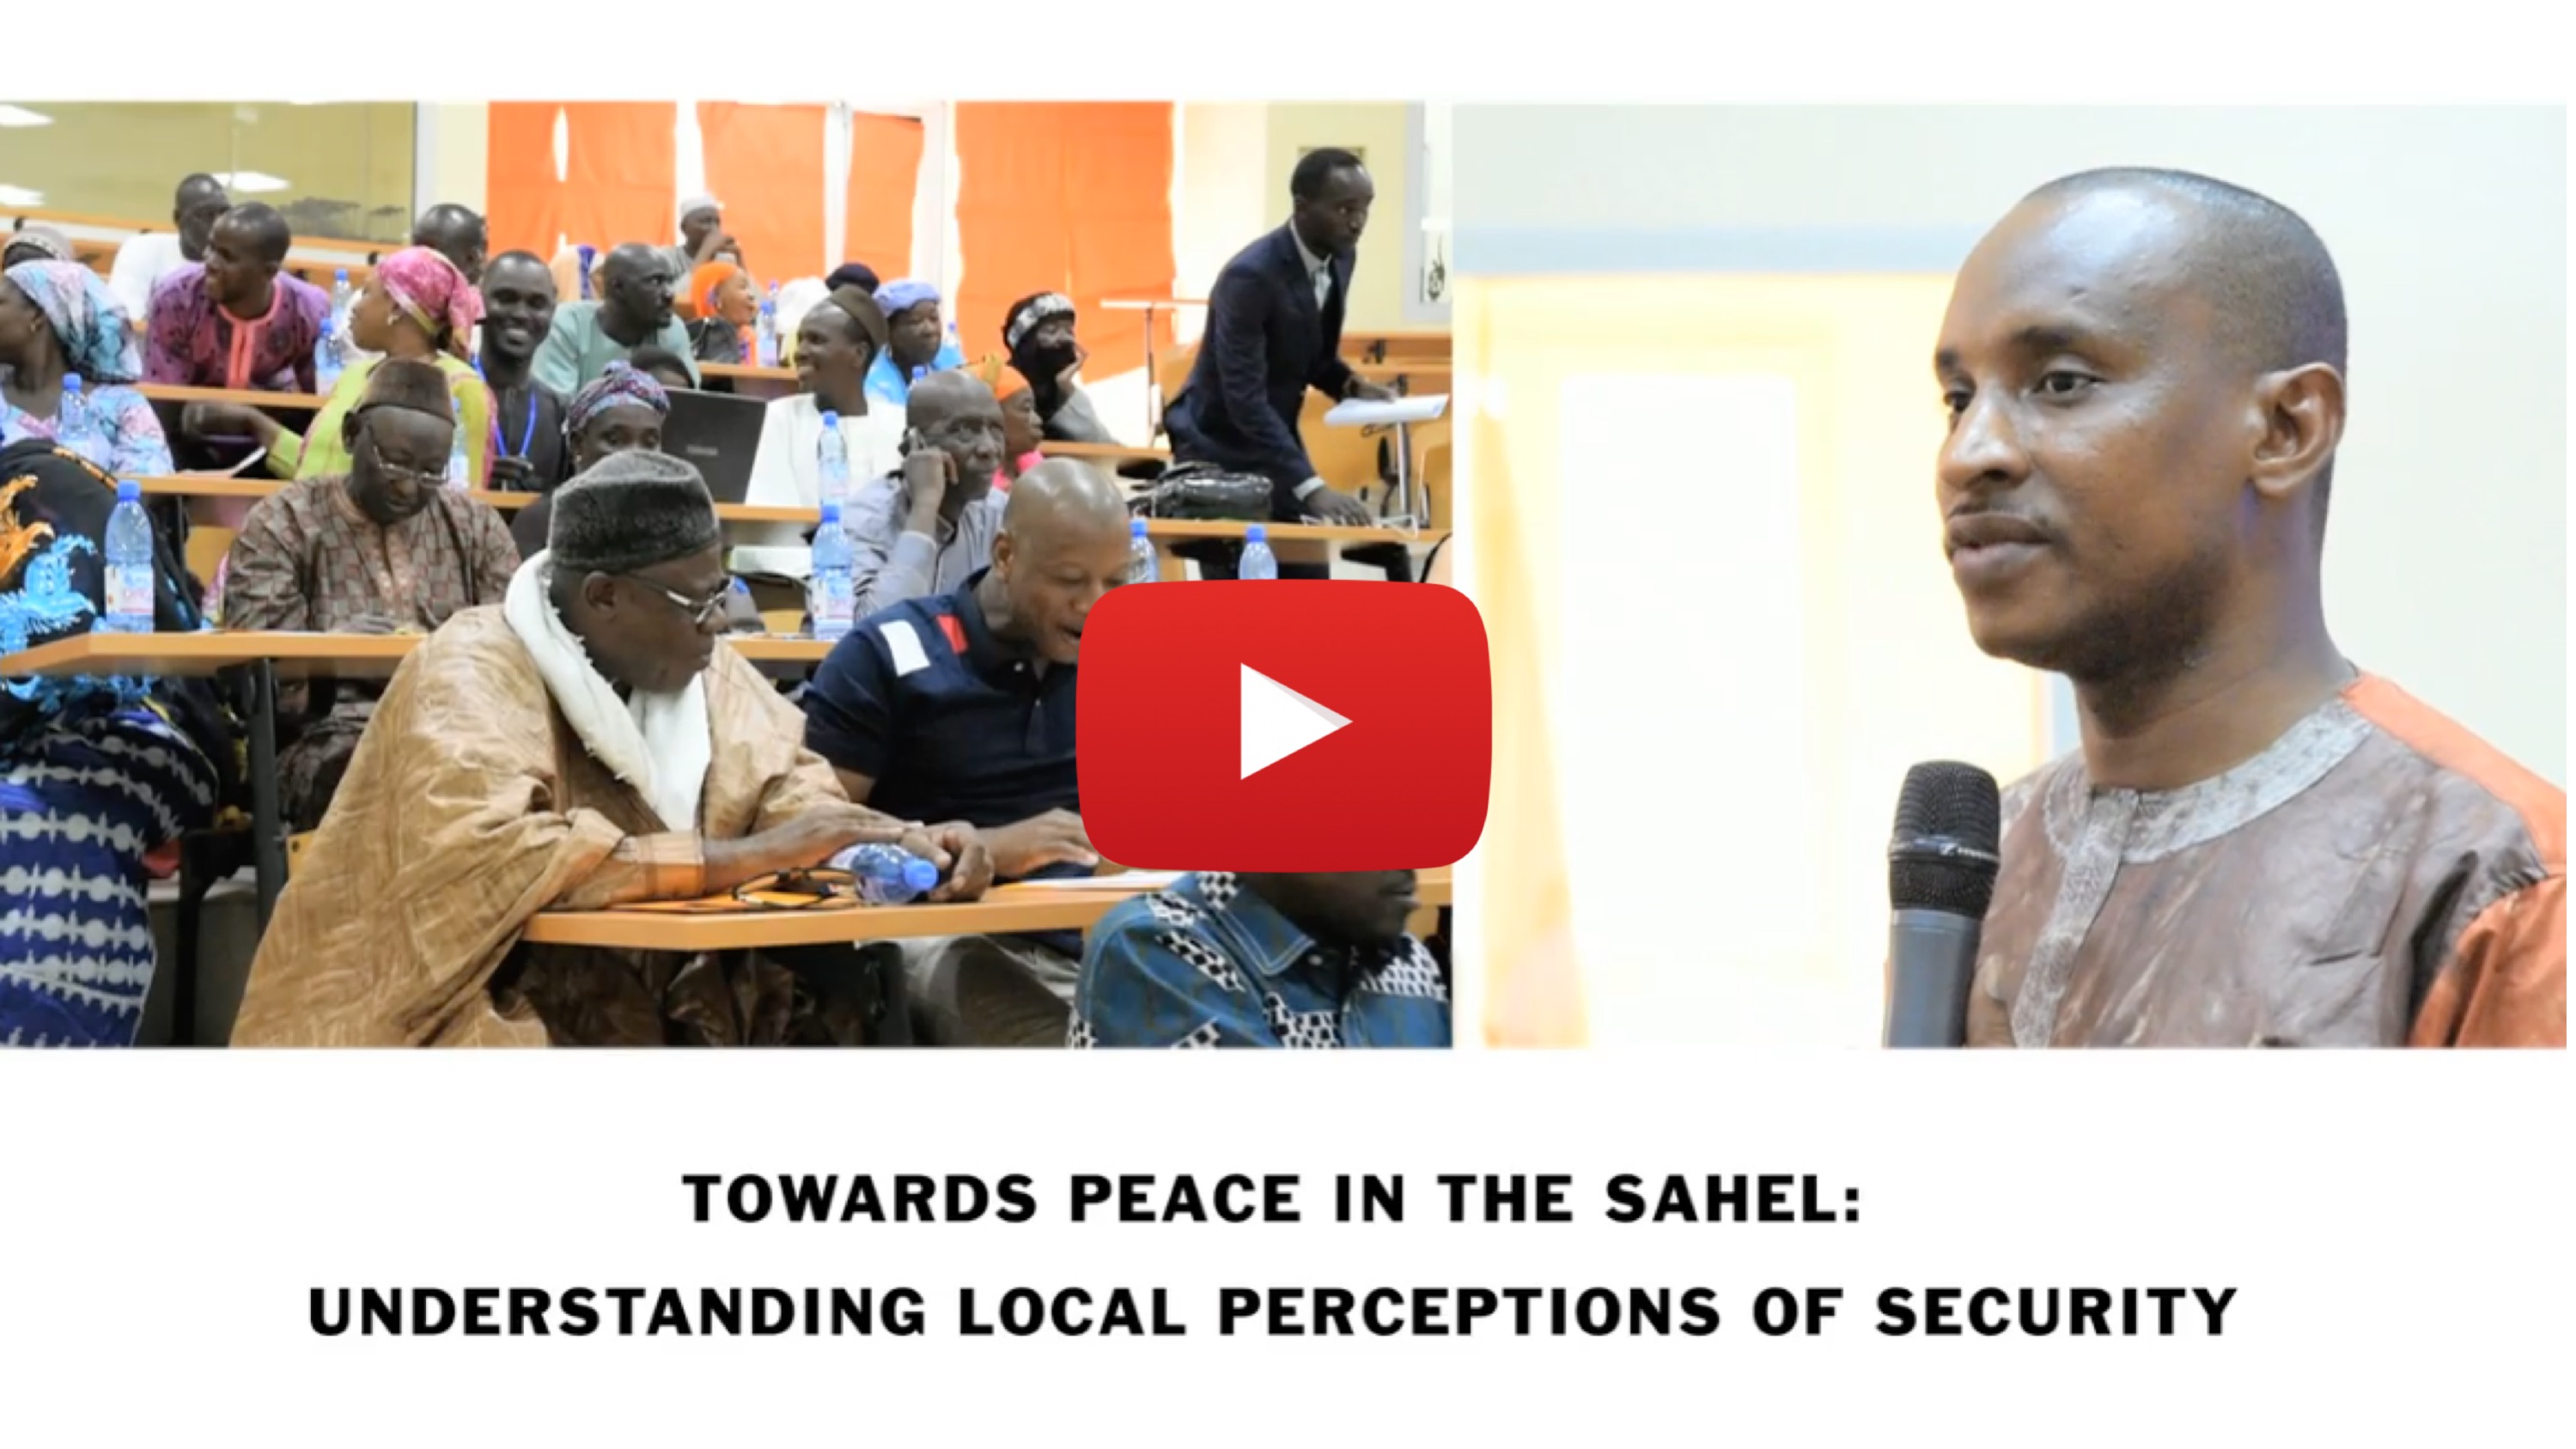 SIPRI launches film series on local perceptions of security in Mali